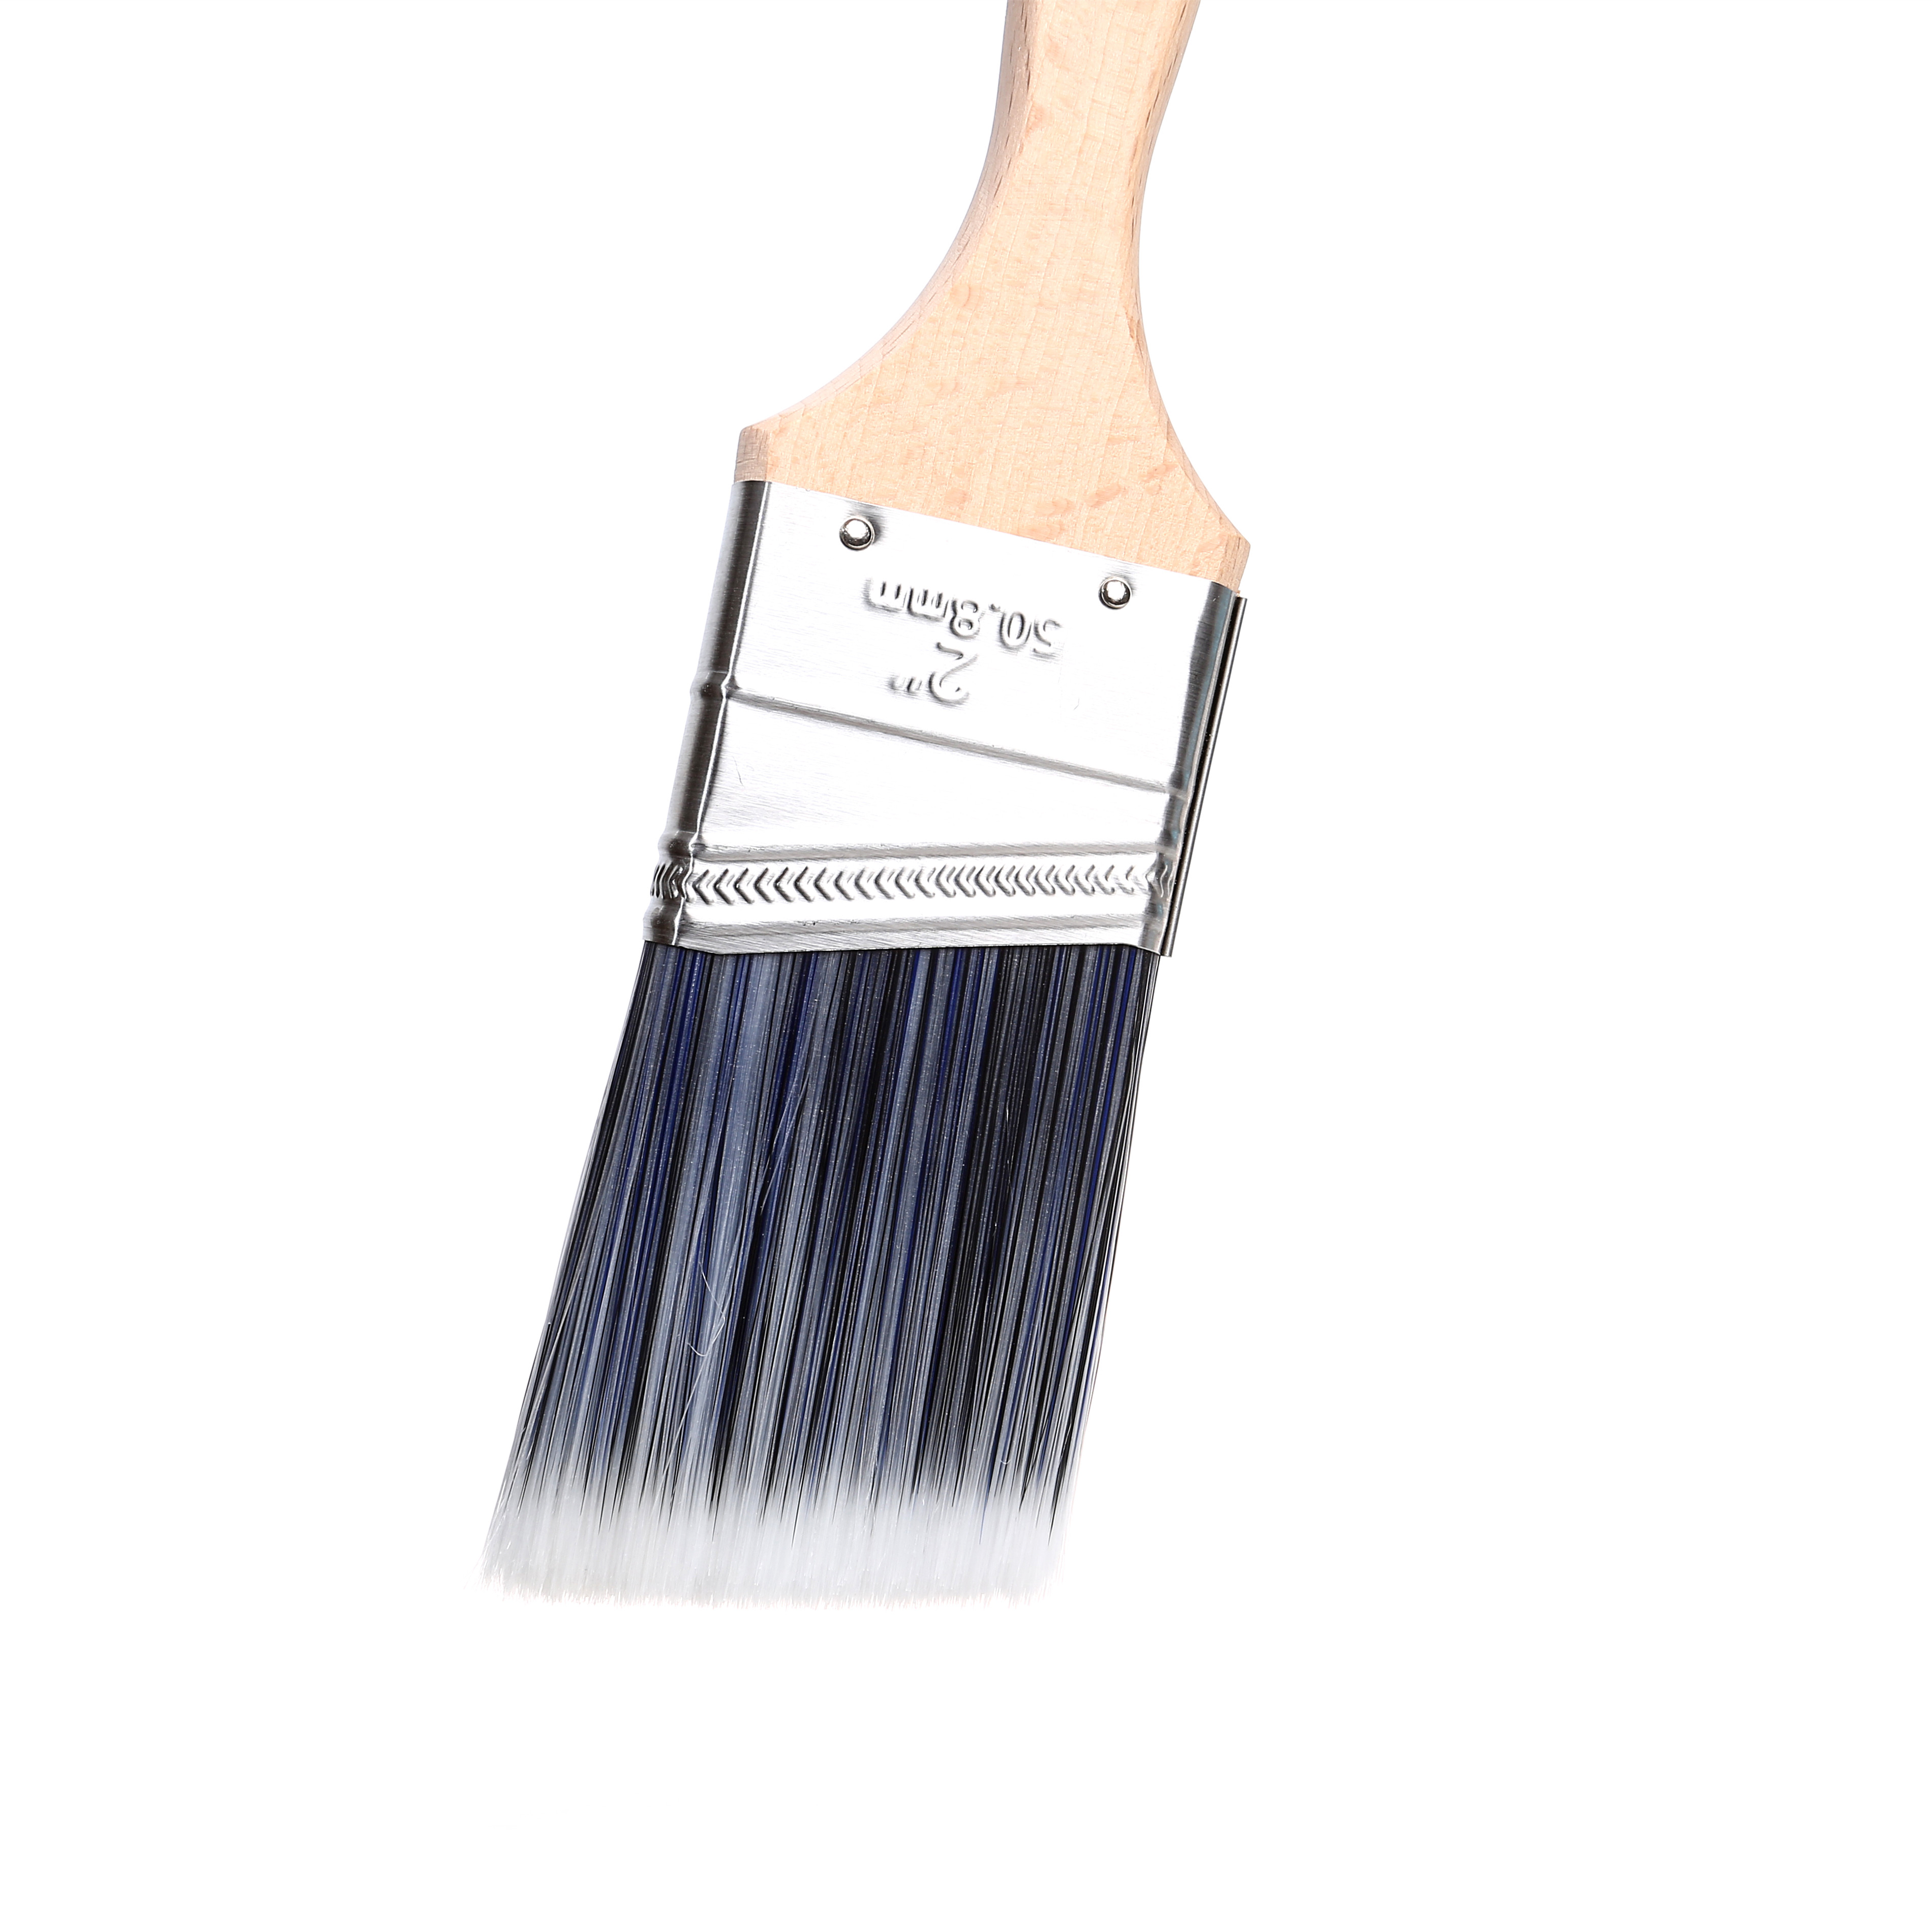 Purdy Style Angle Brush with Long Handle 